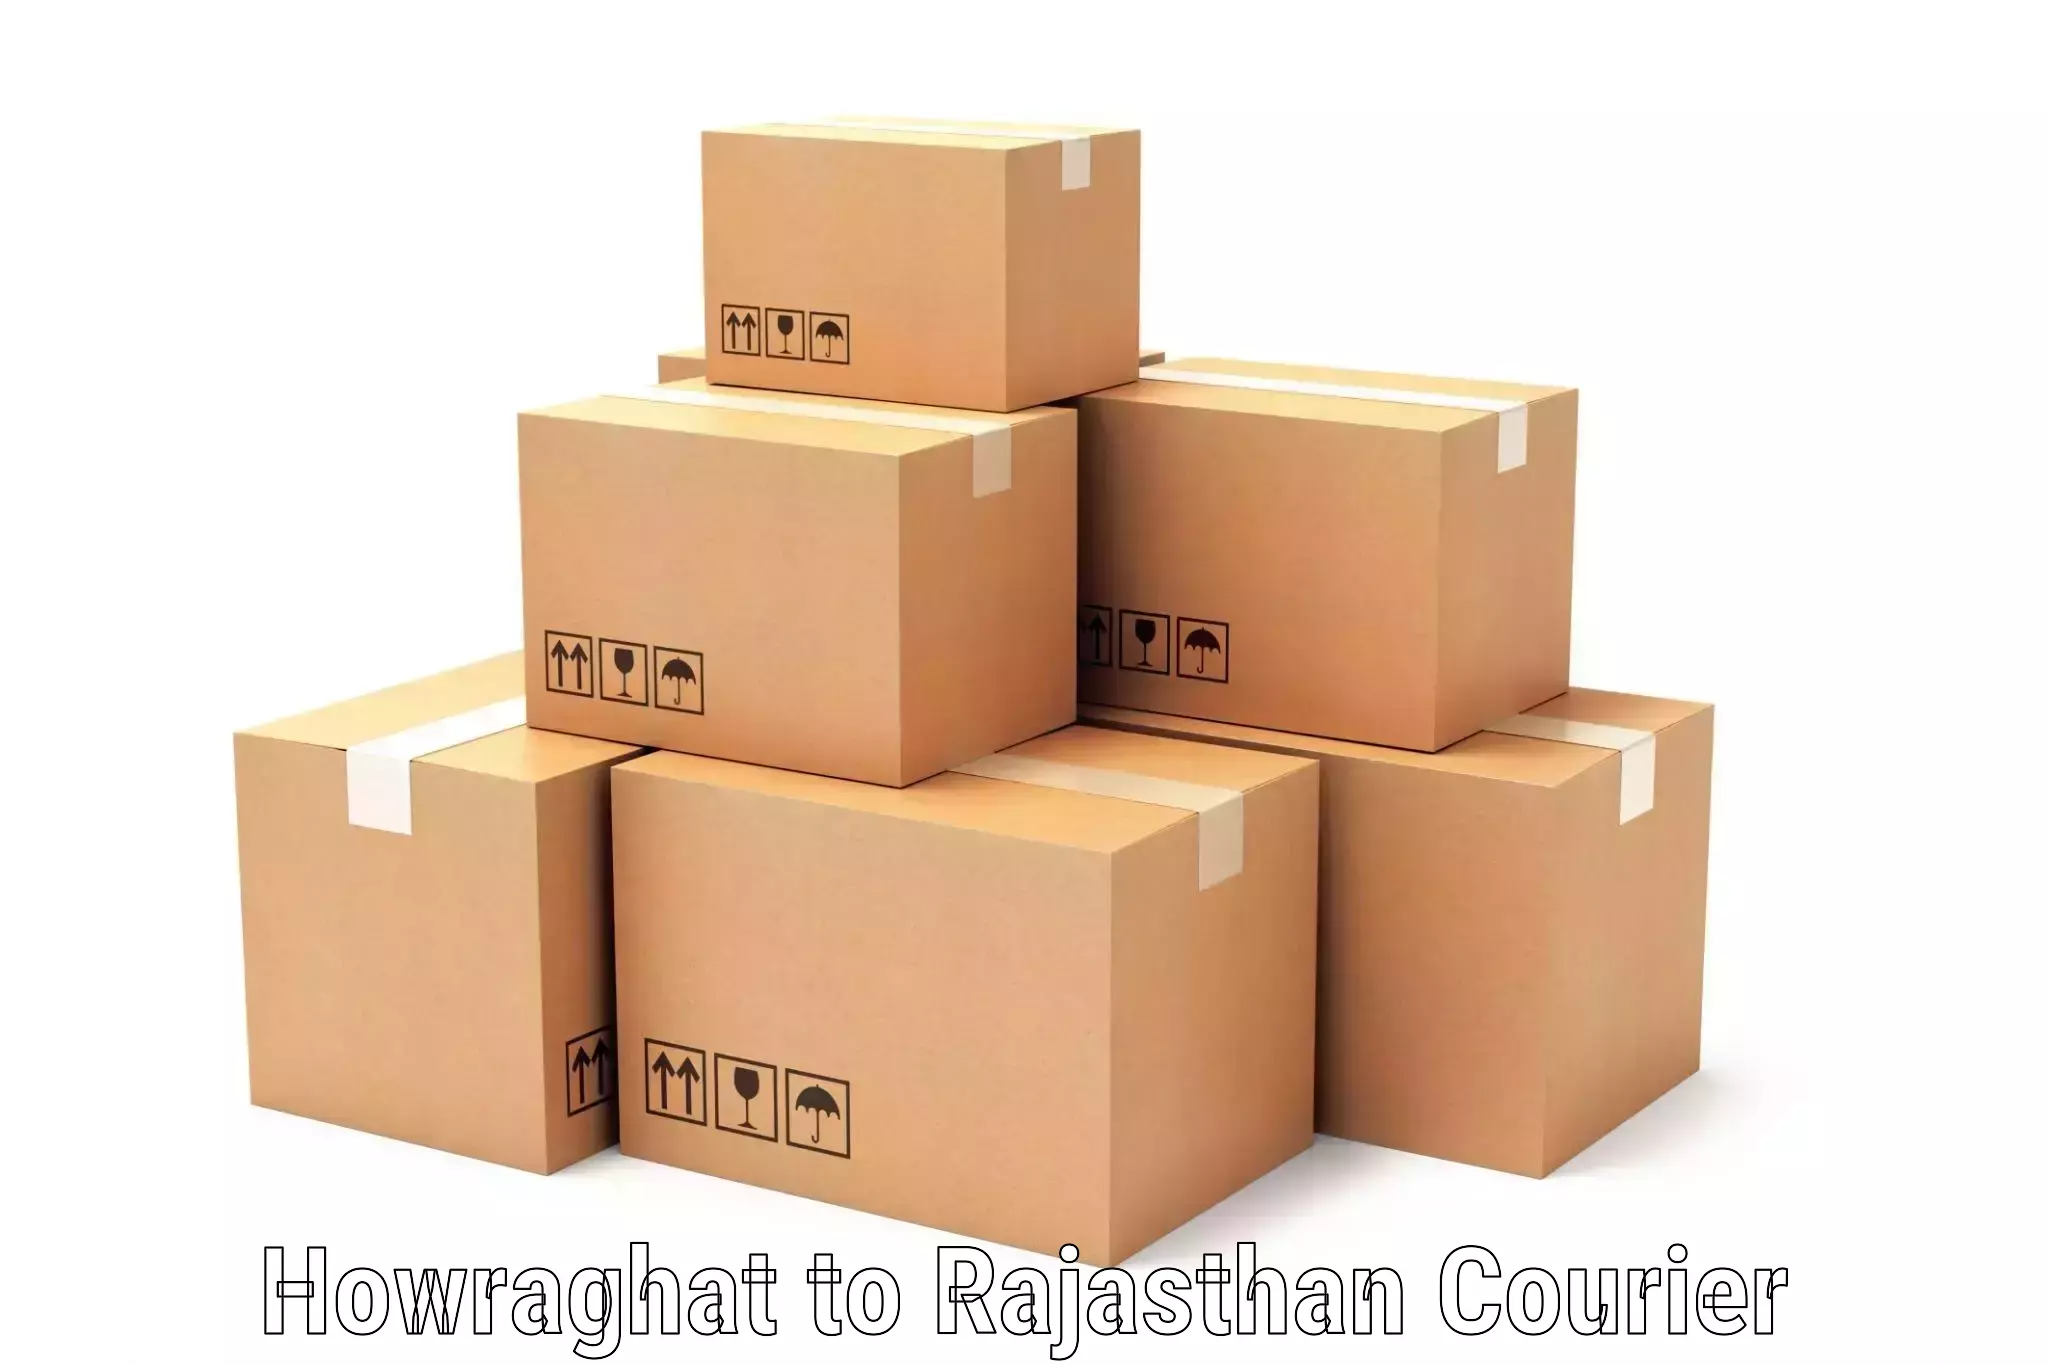 Small parcel delivery Howraghat to Gudha Gorji